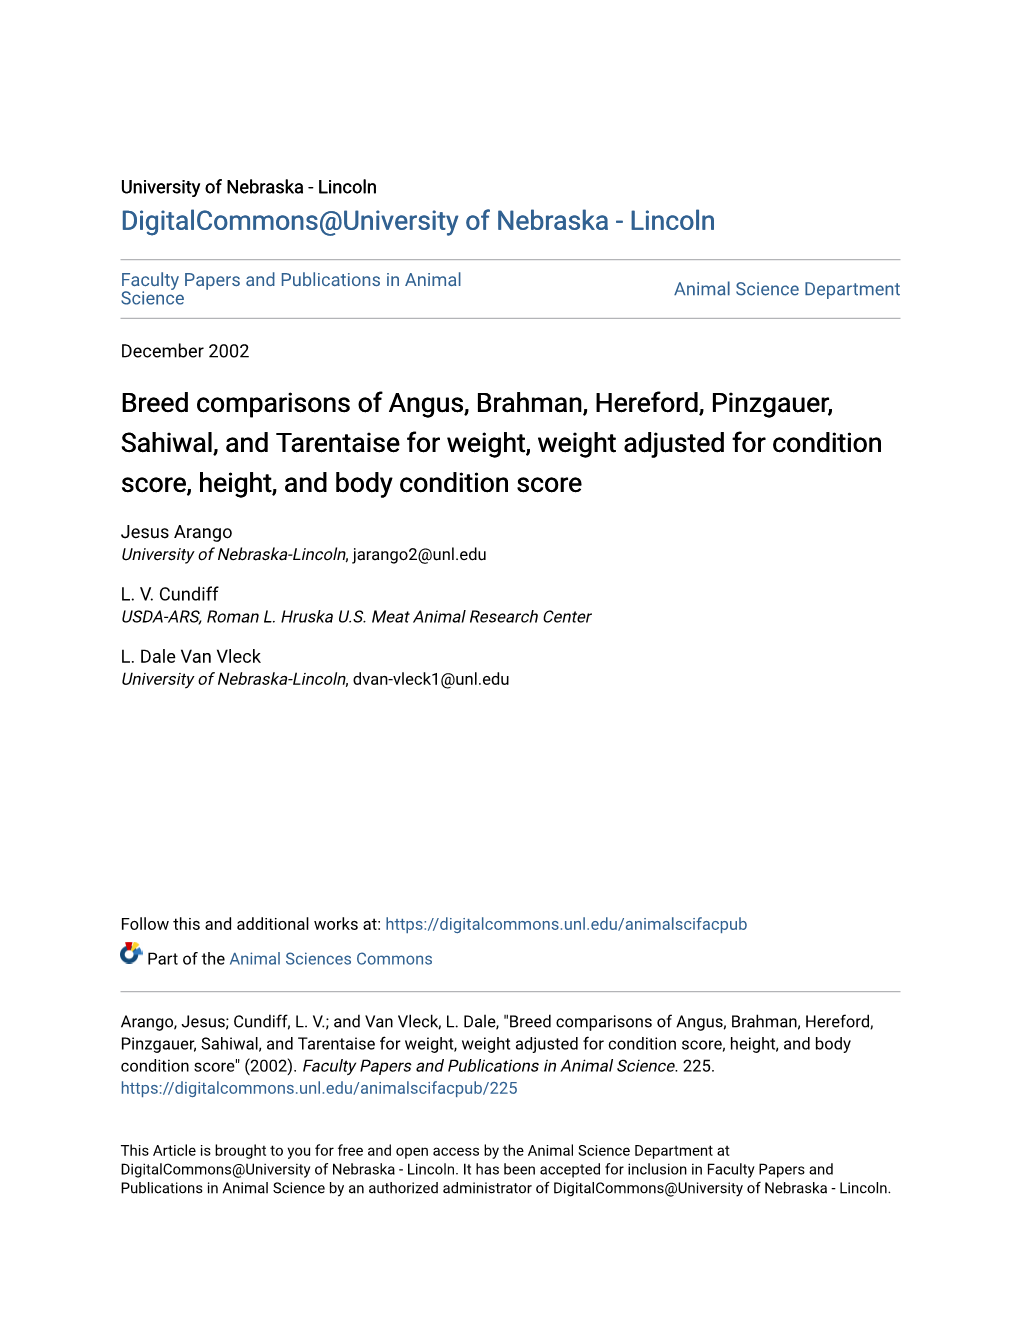 Breed Comparisons of Angus, Brahman, Hereford, Pinzgauer, Sahiwal, and Tarentaise for Weight, Weight Adjusted for Condition Score, Height, and Body Condition Score